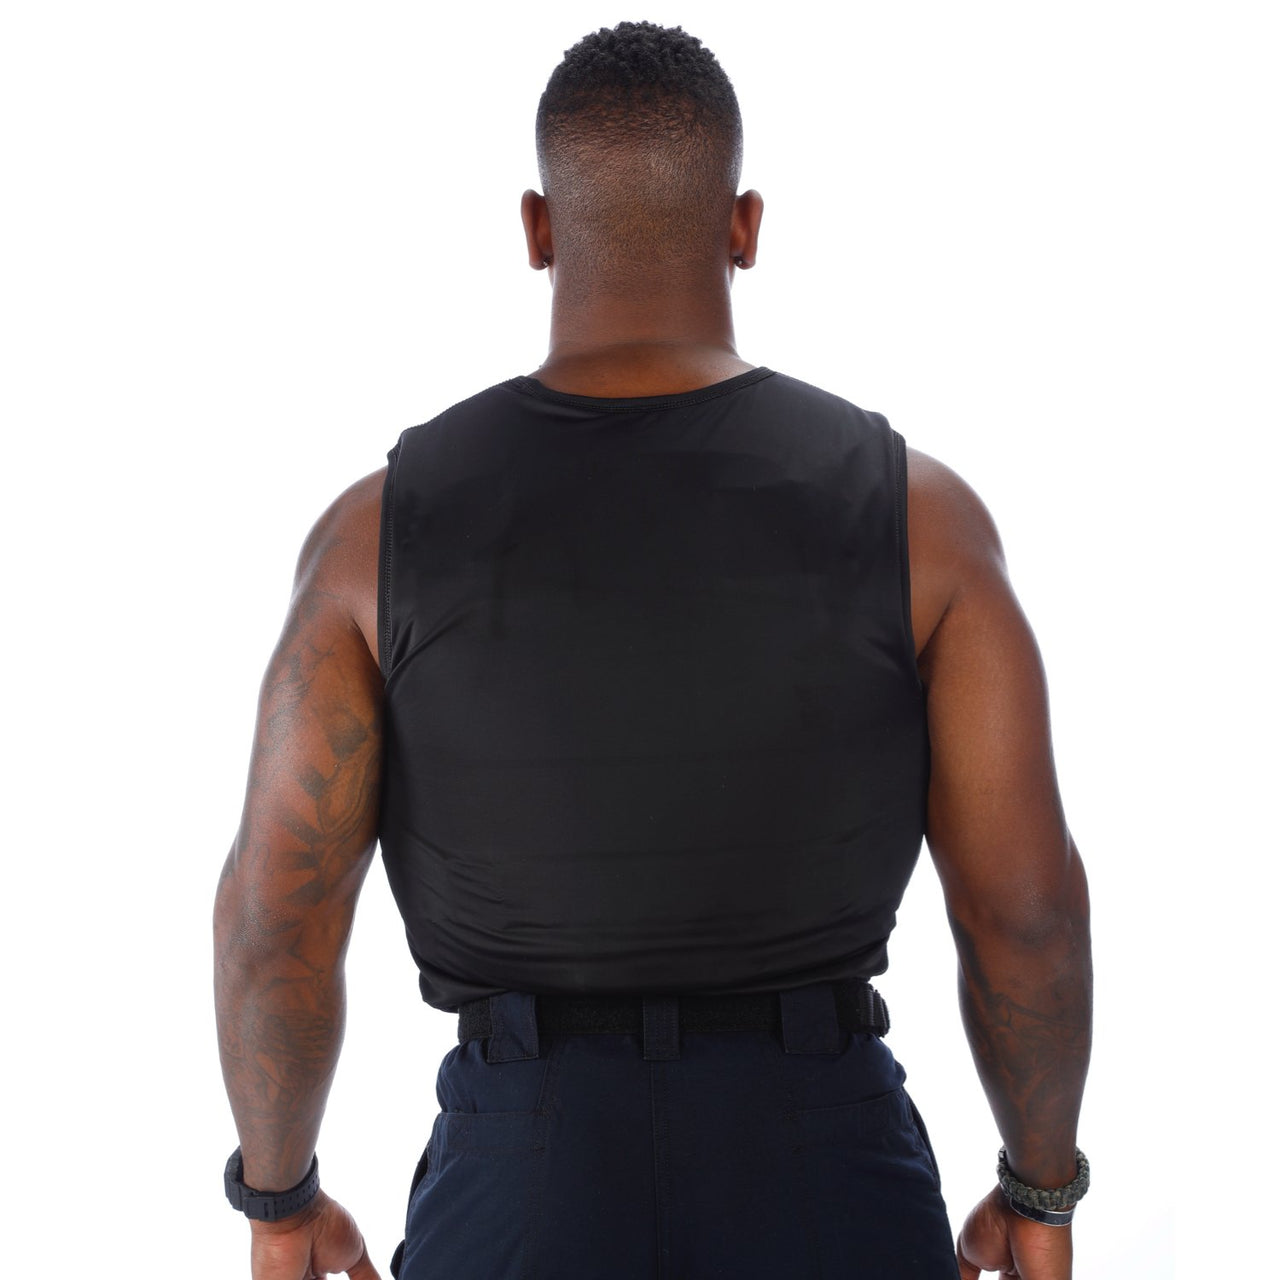 The back view of a man wearing a Body Armor Direct VIP T-Shirt Concealable Enhanced Multi-Threat.